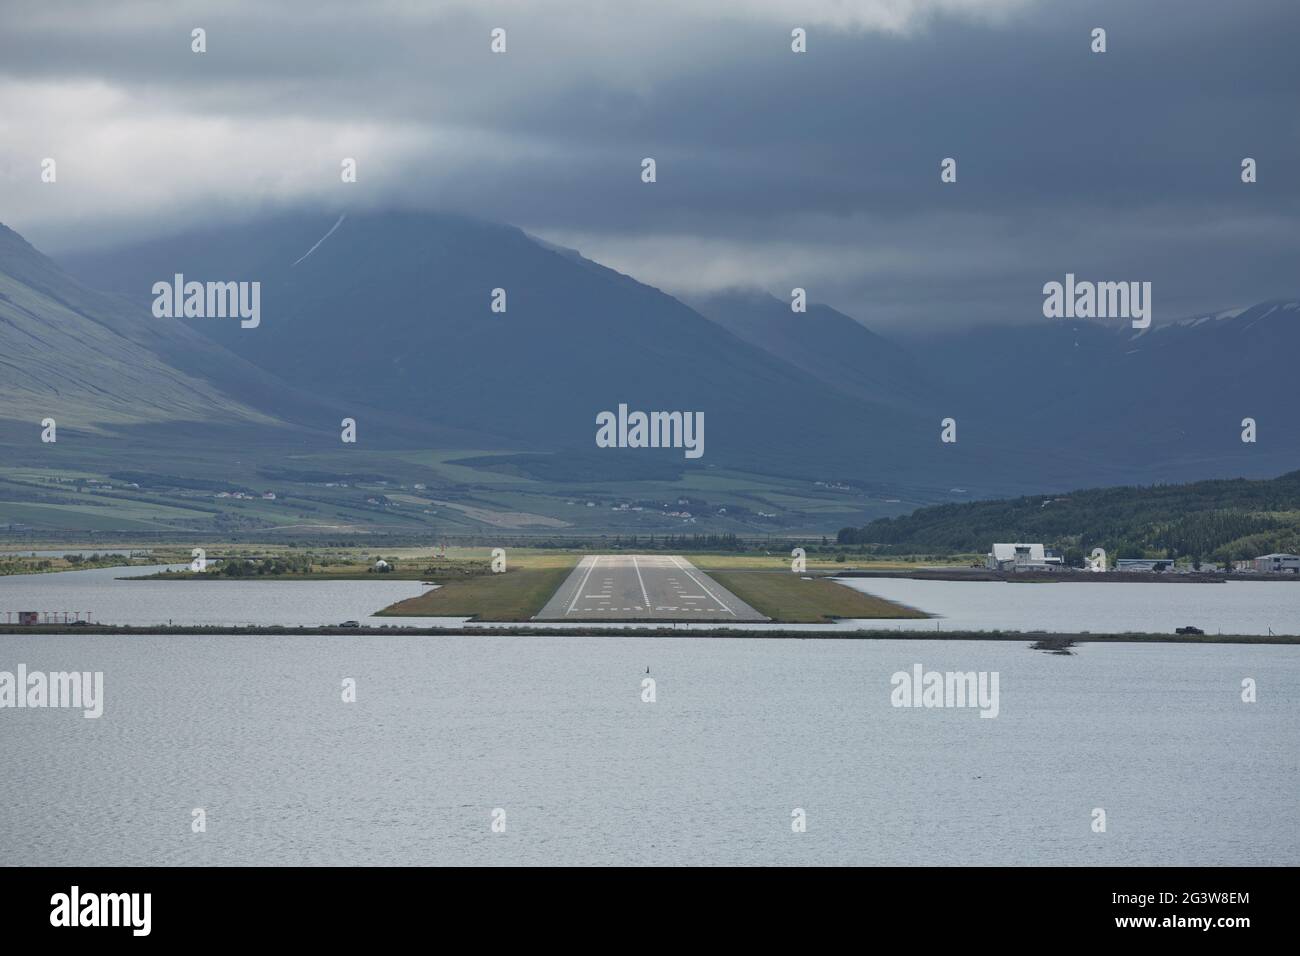 View from the end of runway at Akureyri airport in Iceland. A small plane is taking off Stock Photo